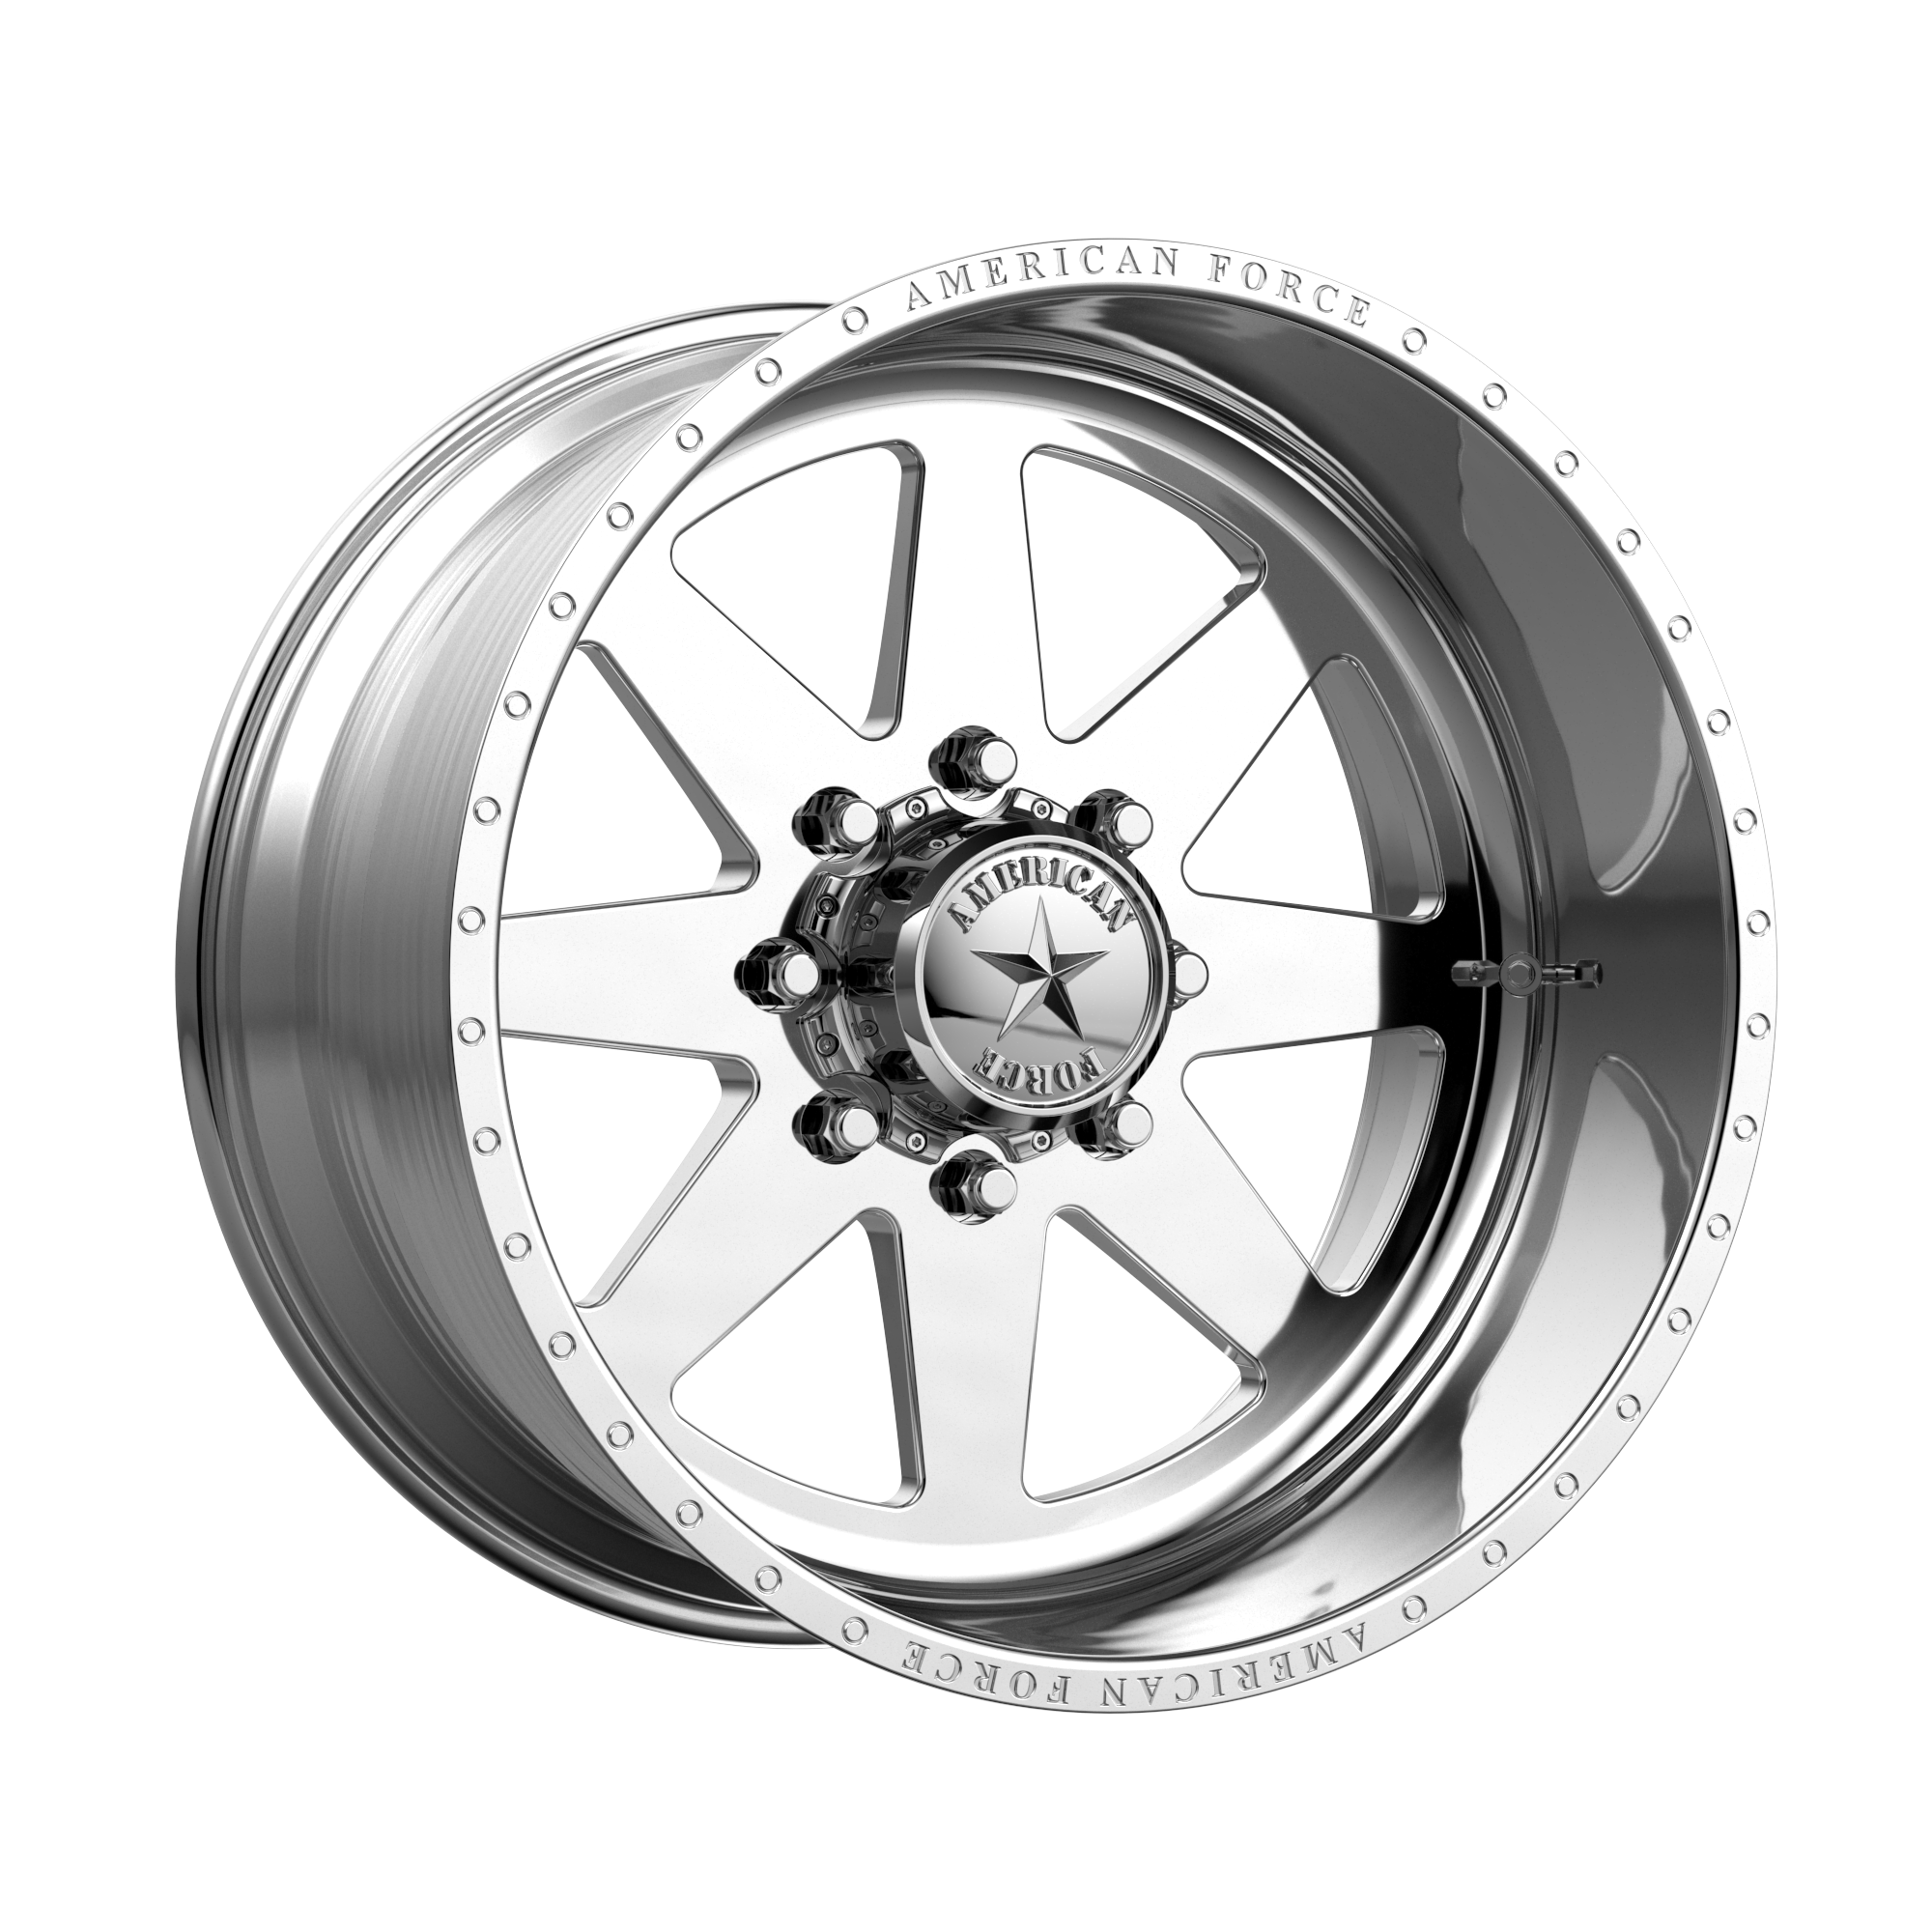 INDEPENDENCE SS 20x14 8x180.00 POLISHED (-73 mm) - Tires and Engine Performance